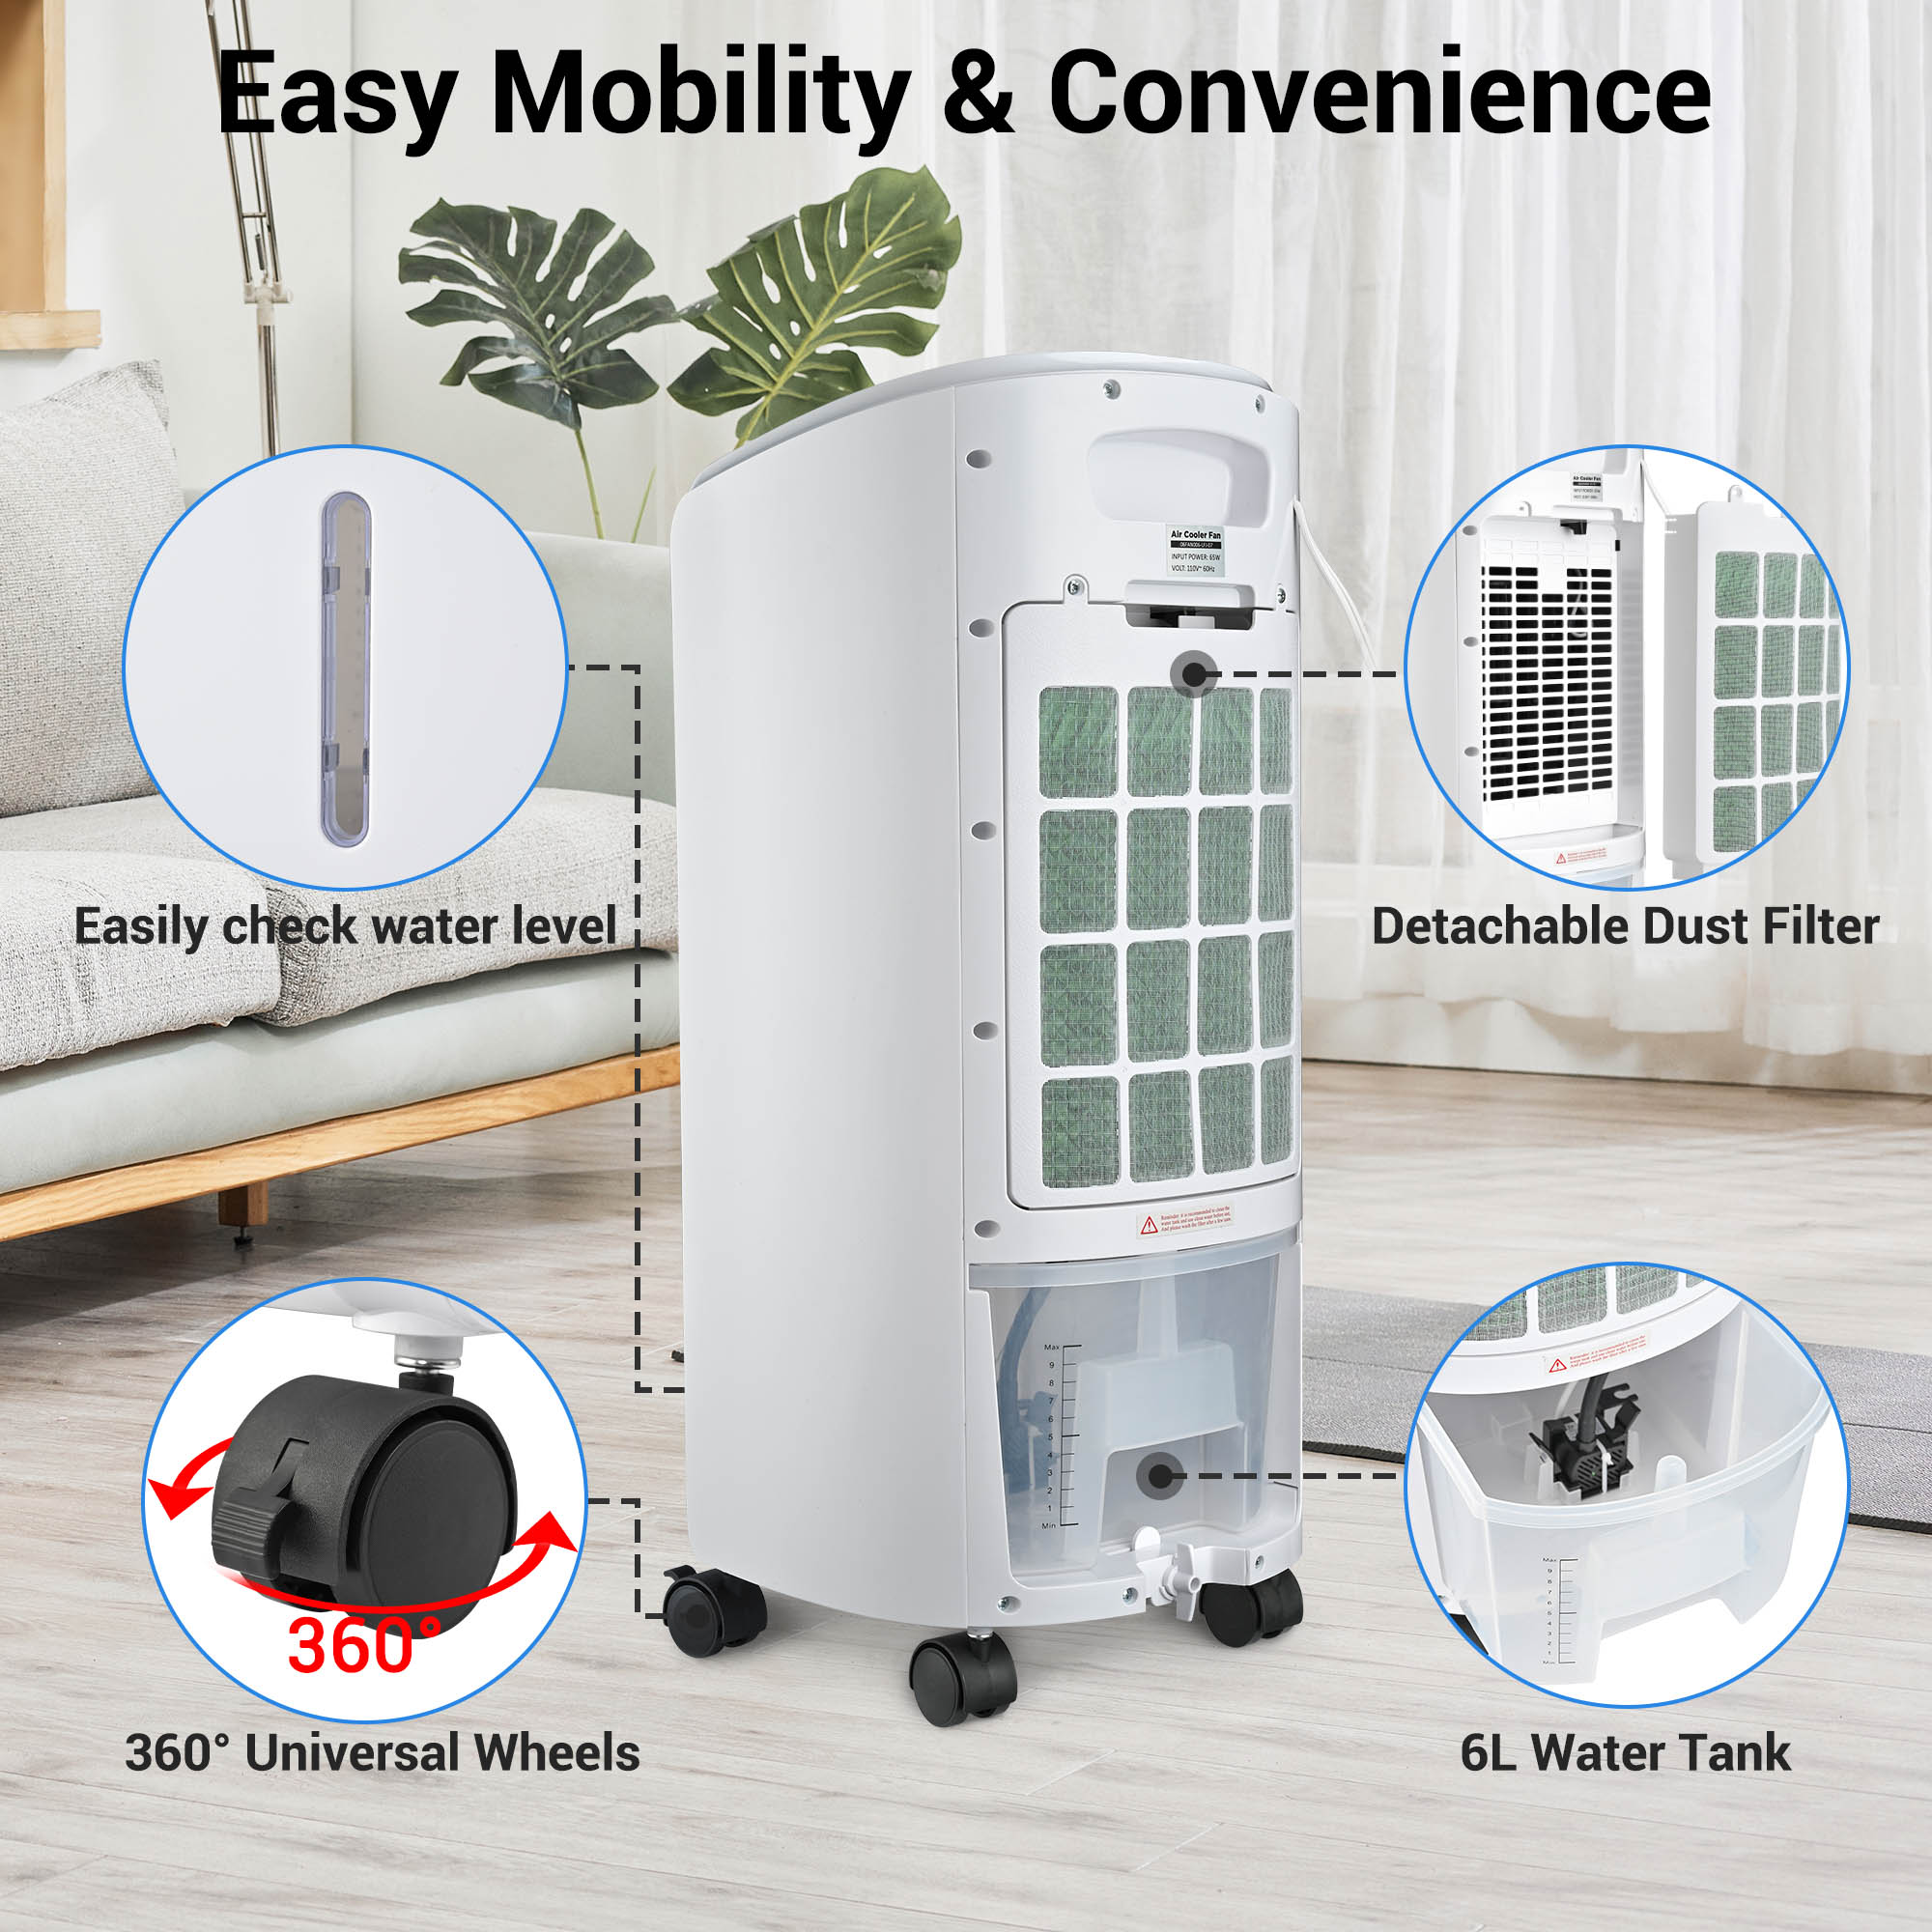 Yescom Evaporative Air Cooler 65W Portable Cooling Fan with Humidifier 3 Speeds & 12H Timer Remote Control 2 Water Tanks & 4 Ice